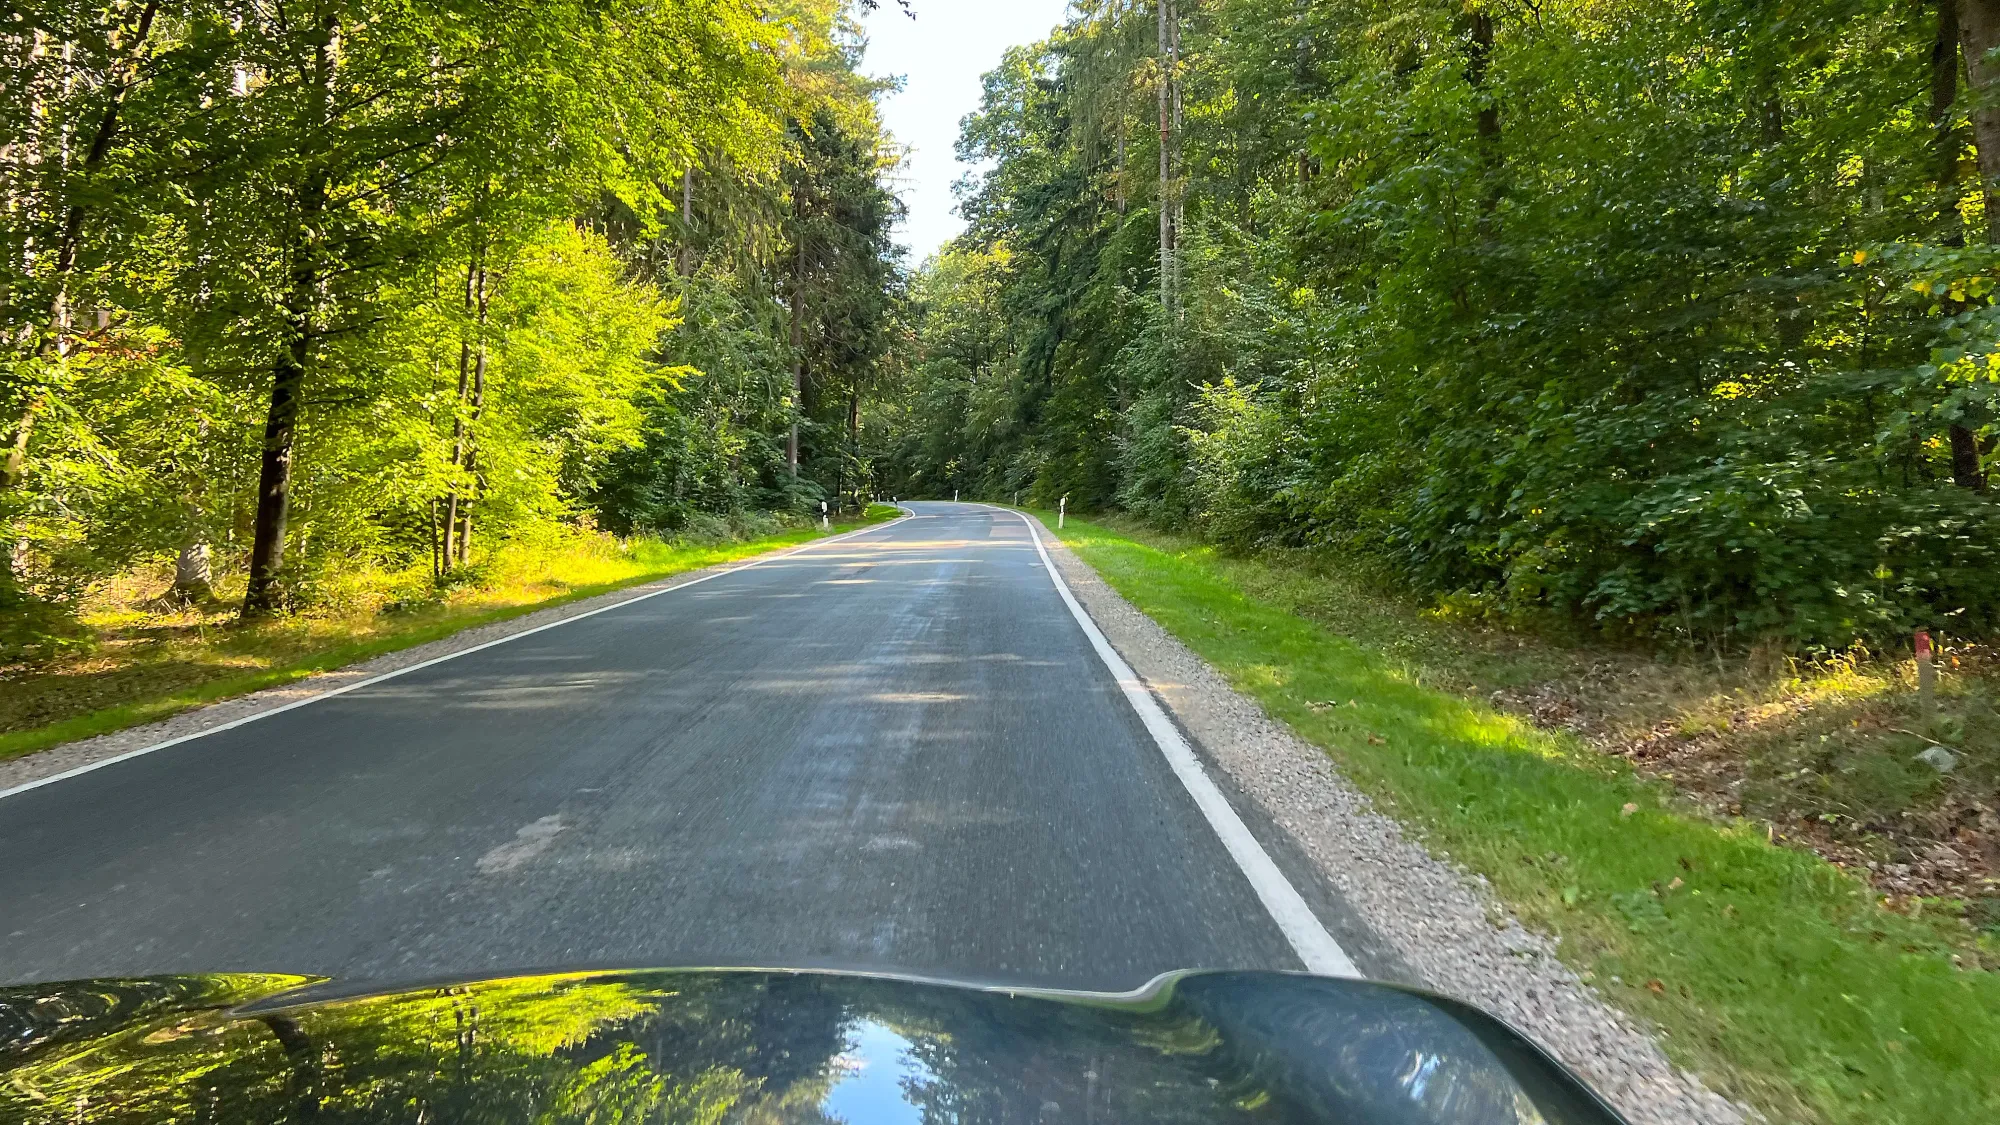 Green foliage on either side of an empty road with the reflection on a silver car hood